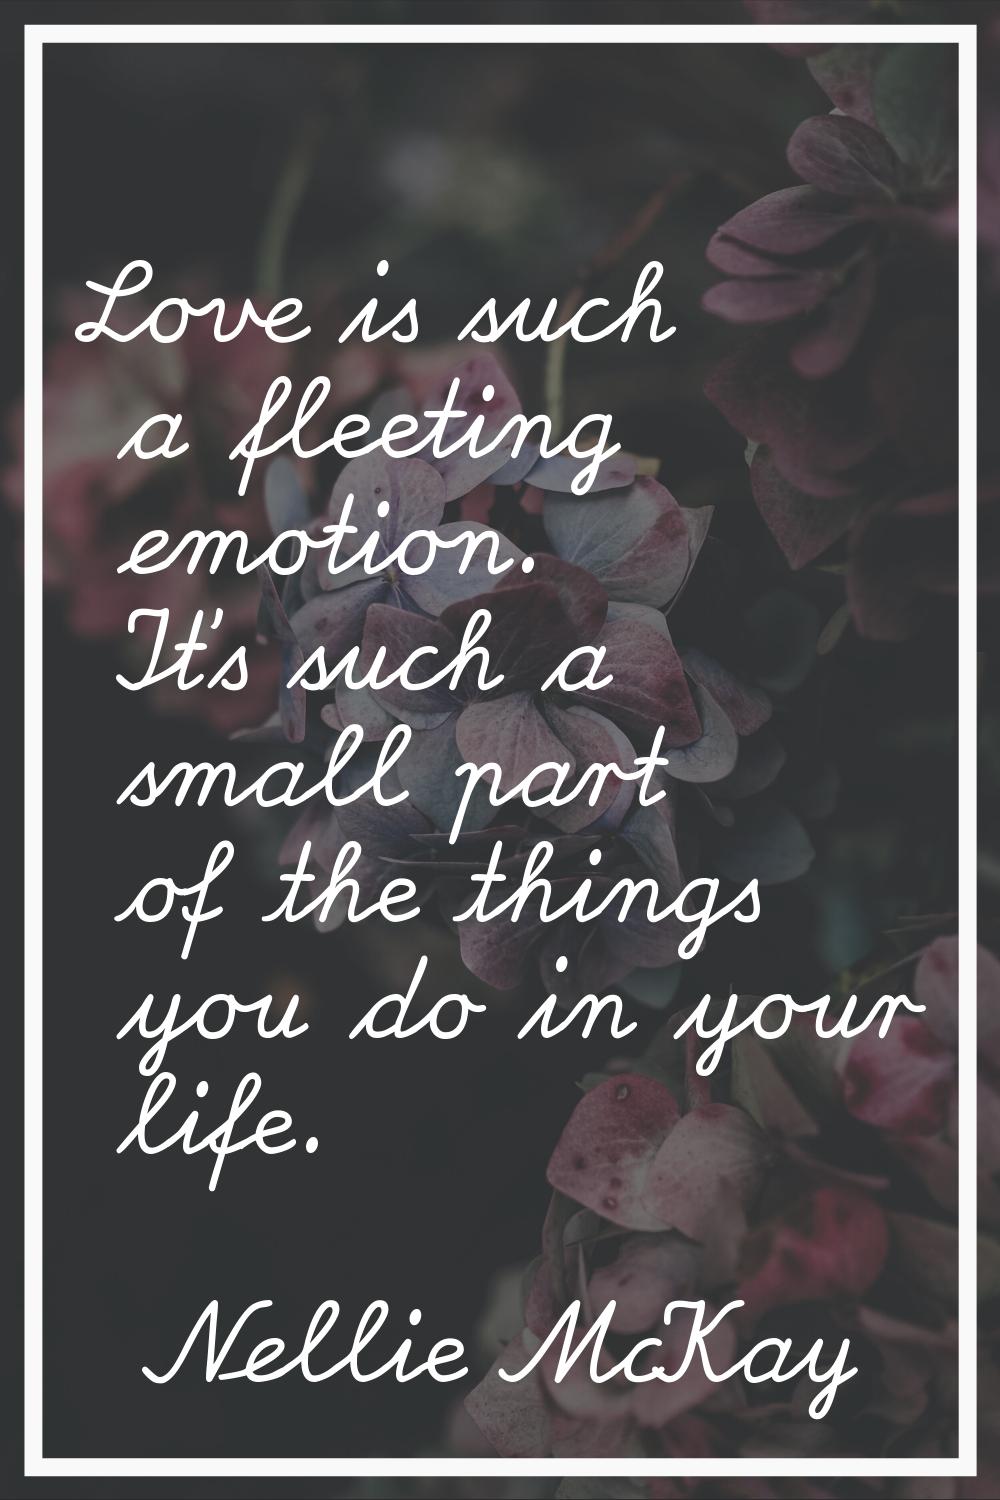 Love is such a fleeting emotion. It's such a small part of the things you do in your life.